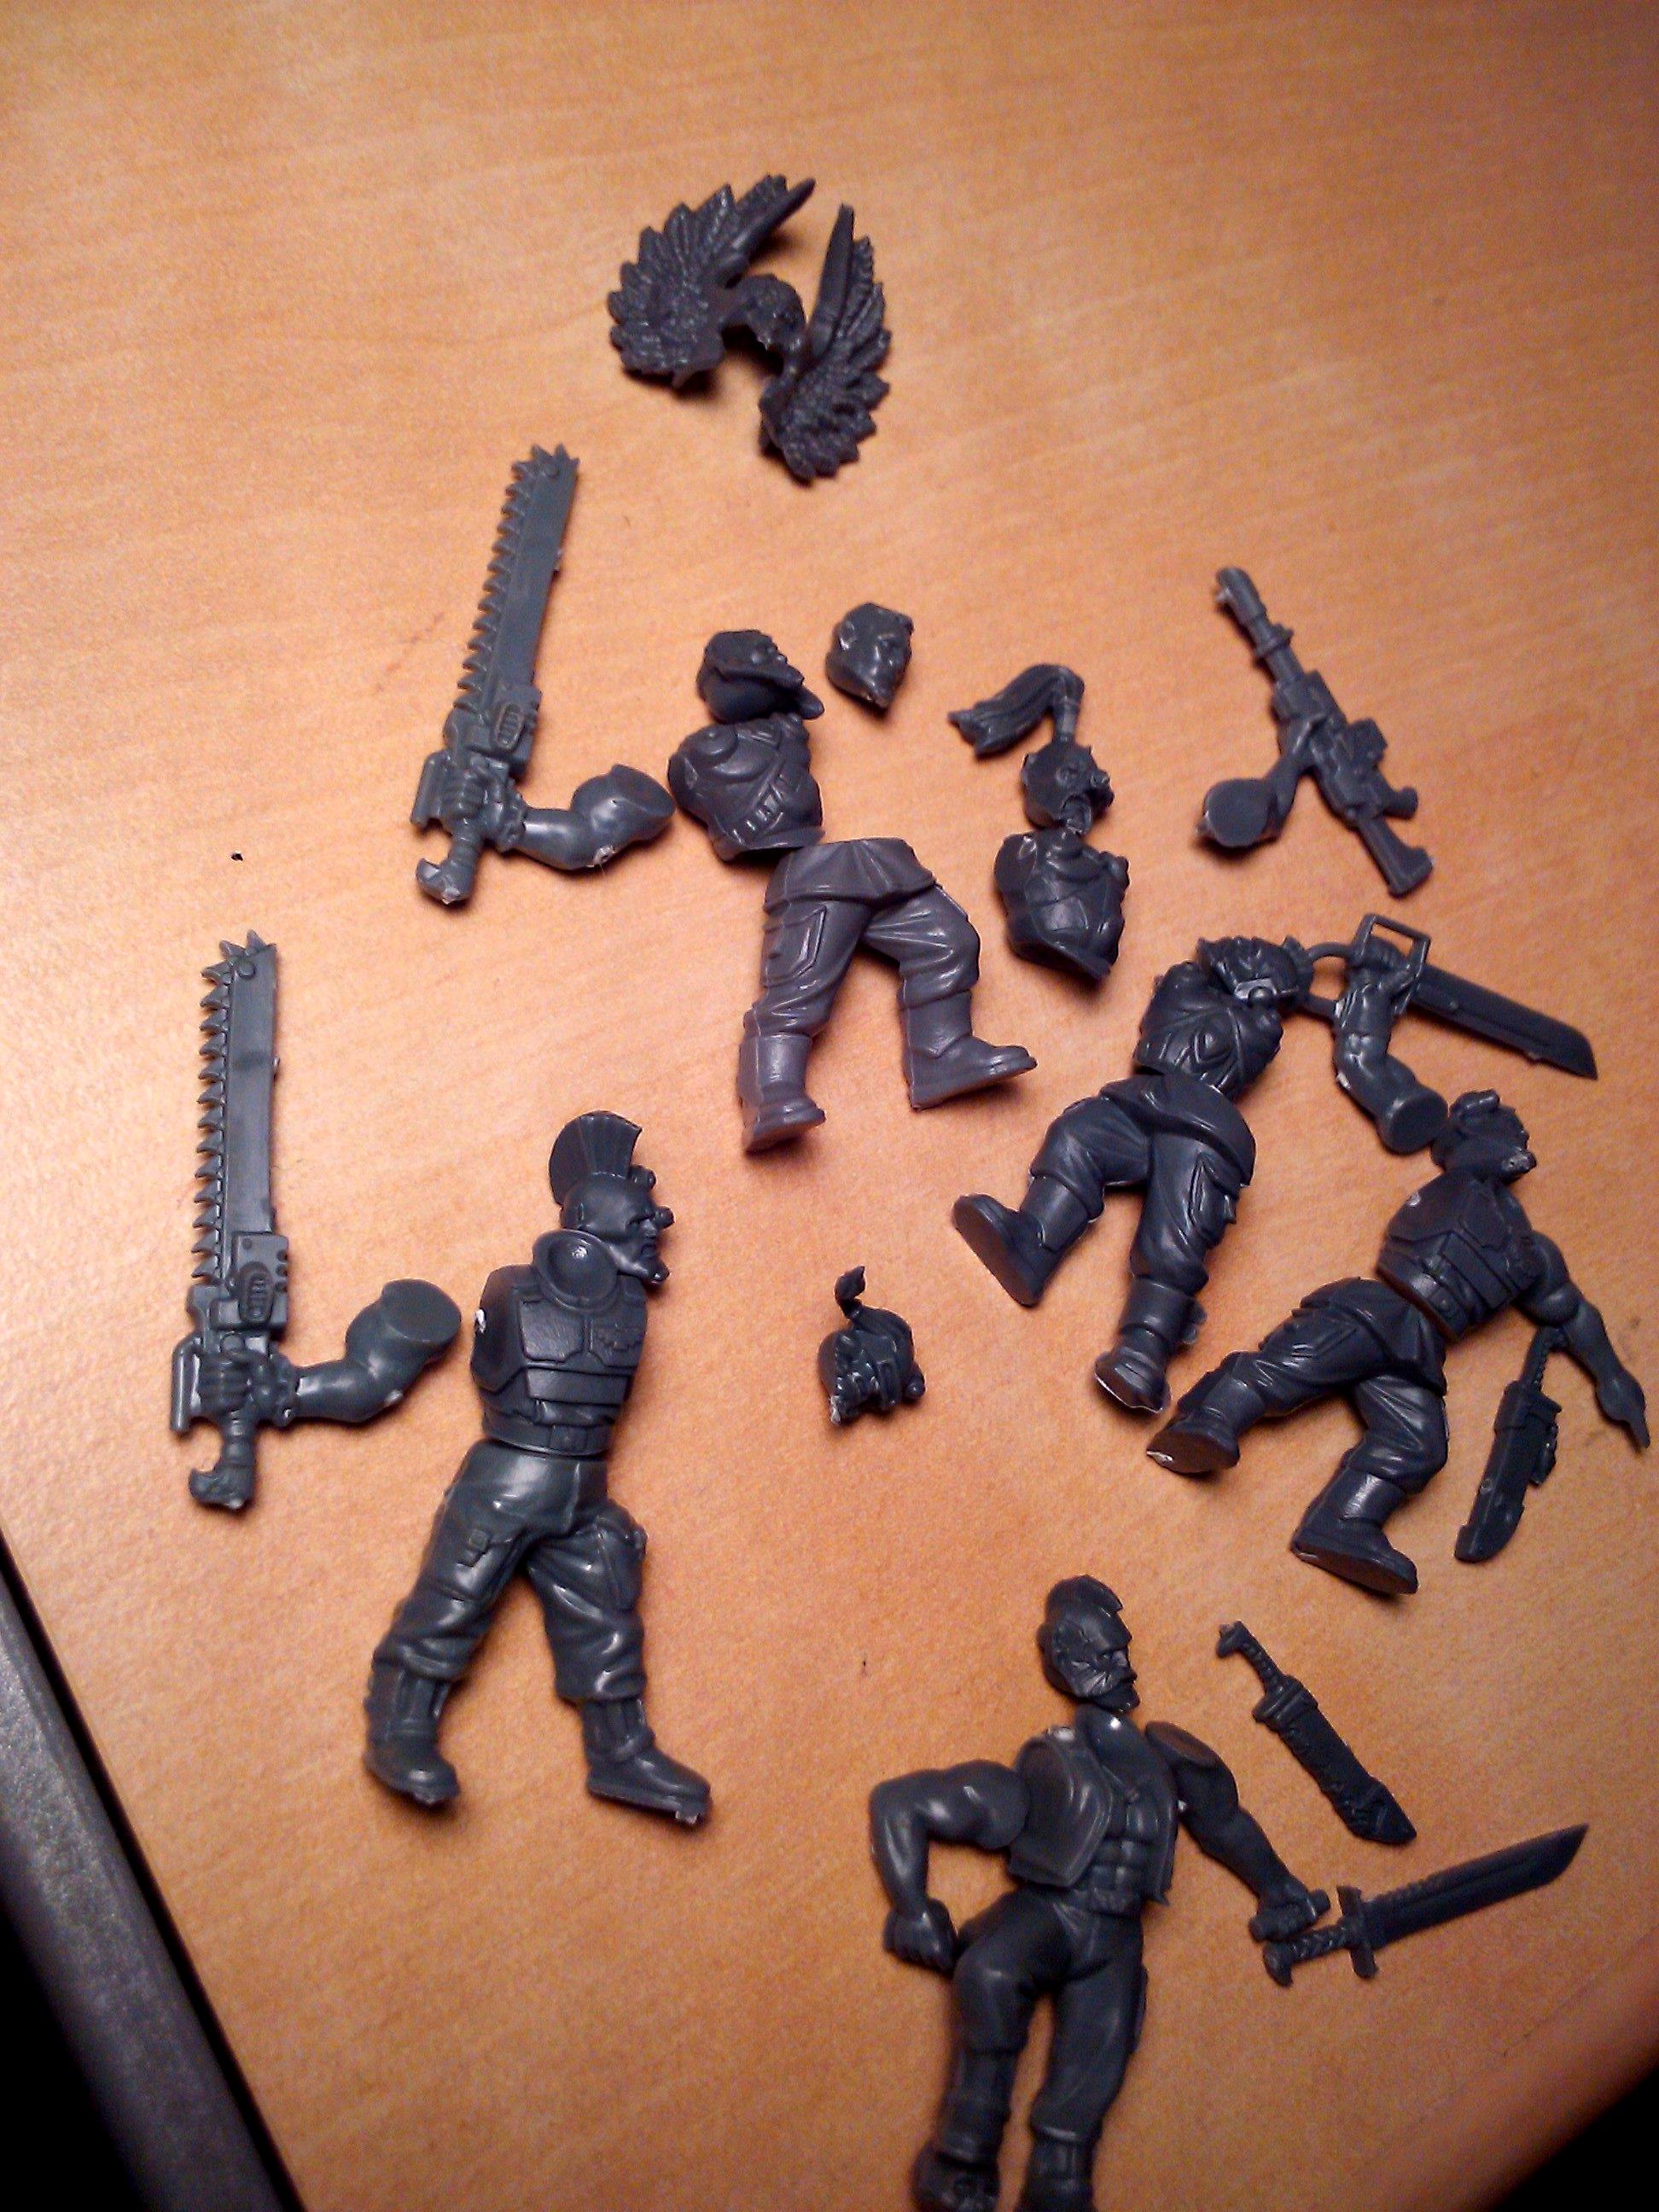 Bits, Cadians, Catachan, Conversion, Fenris, High Elves, Hobby Craft, Imperial Guard, Space Wolves, Sw